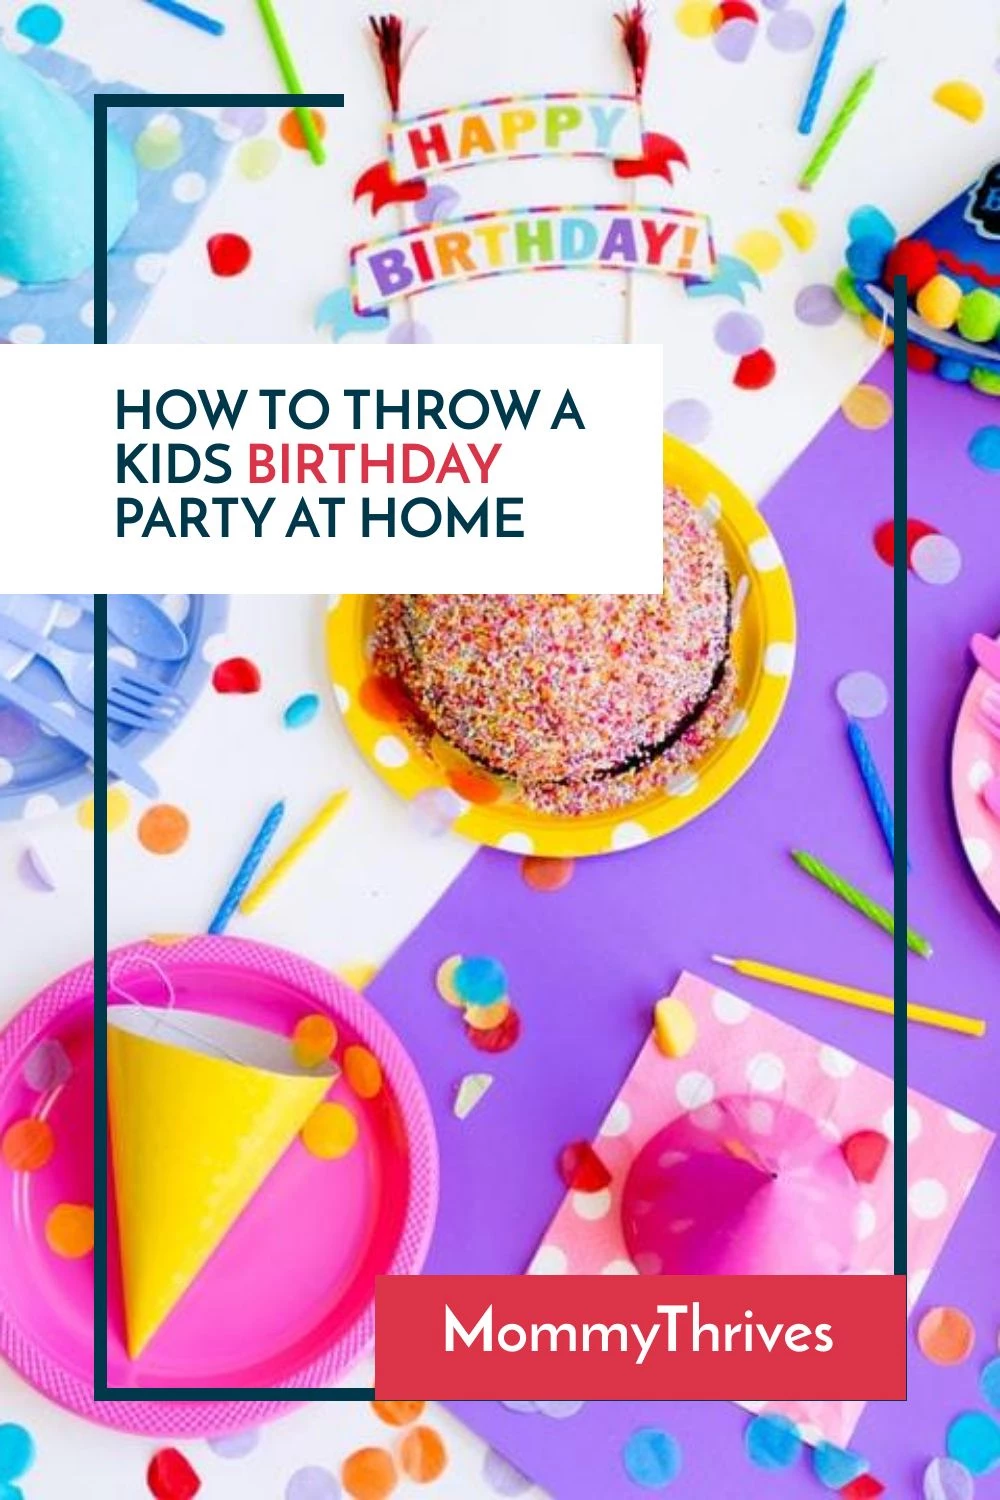 How To Throw A Kid's Birthday Party At Home - MommyThrives